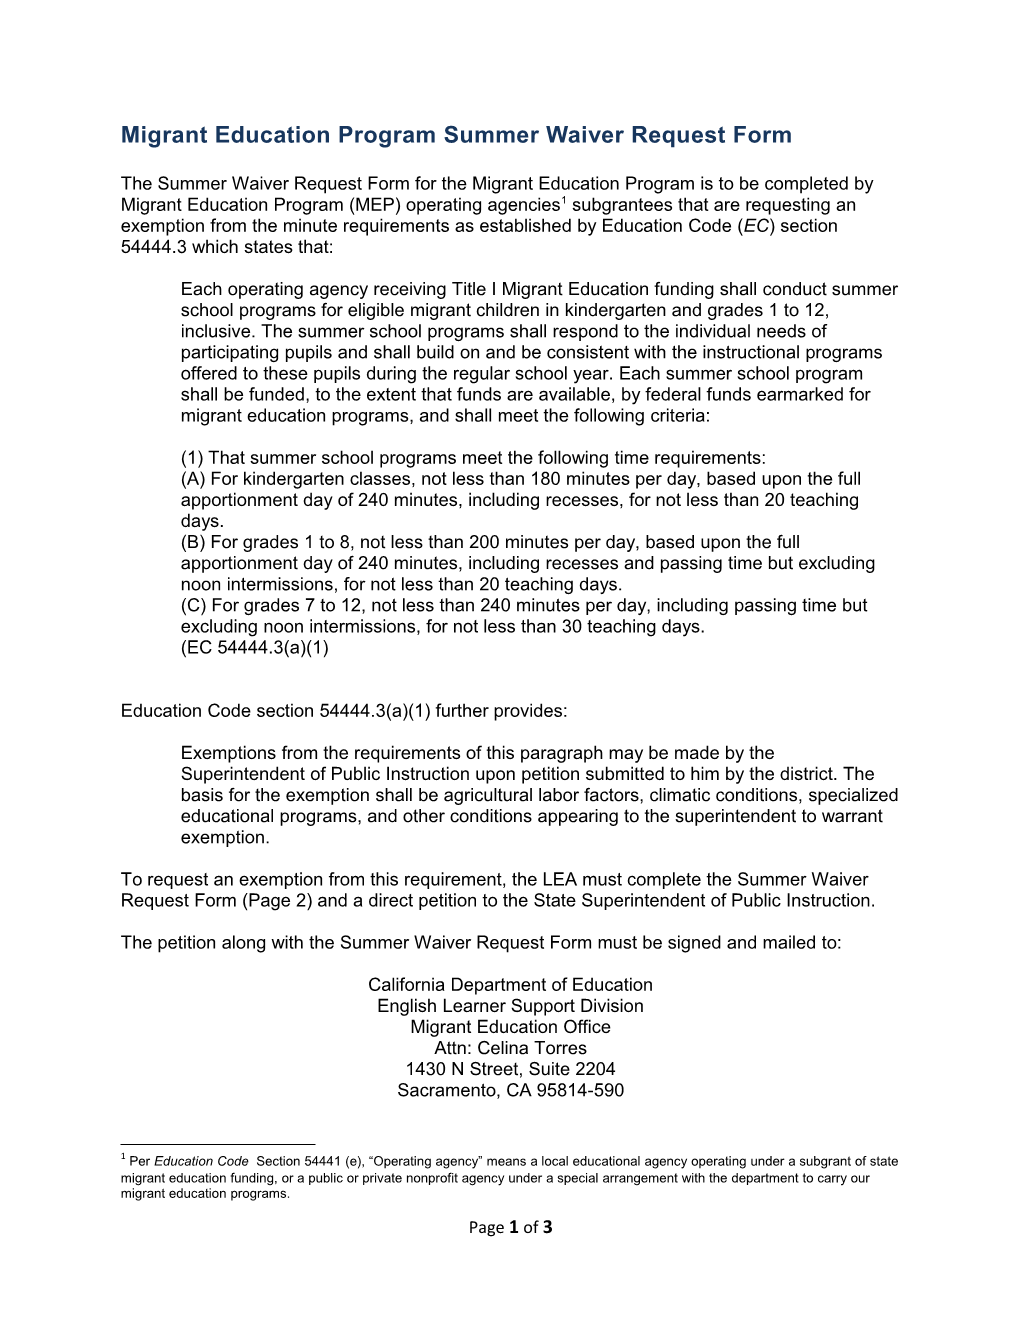 Waiver-16: MEP (CA Dept of Education)